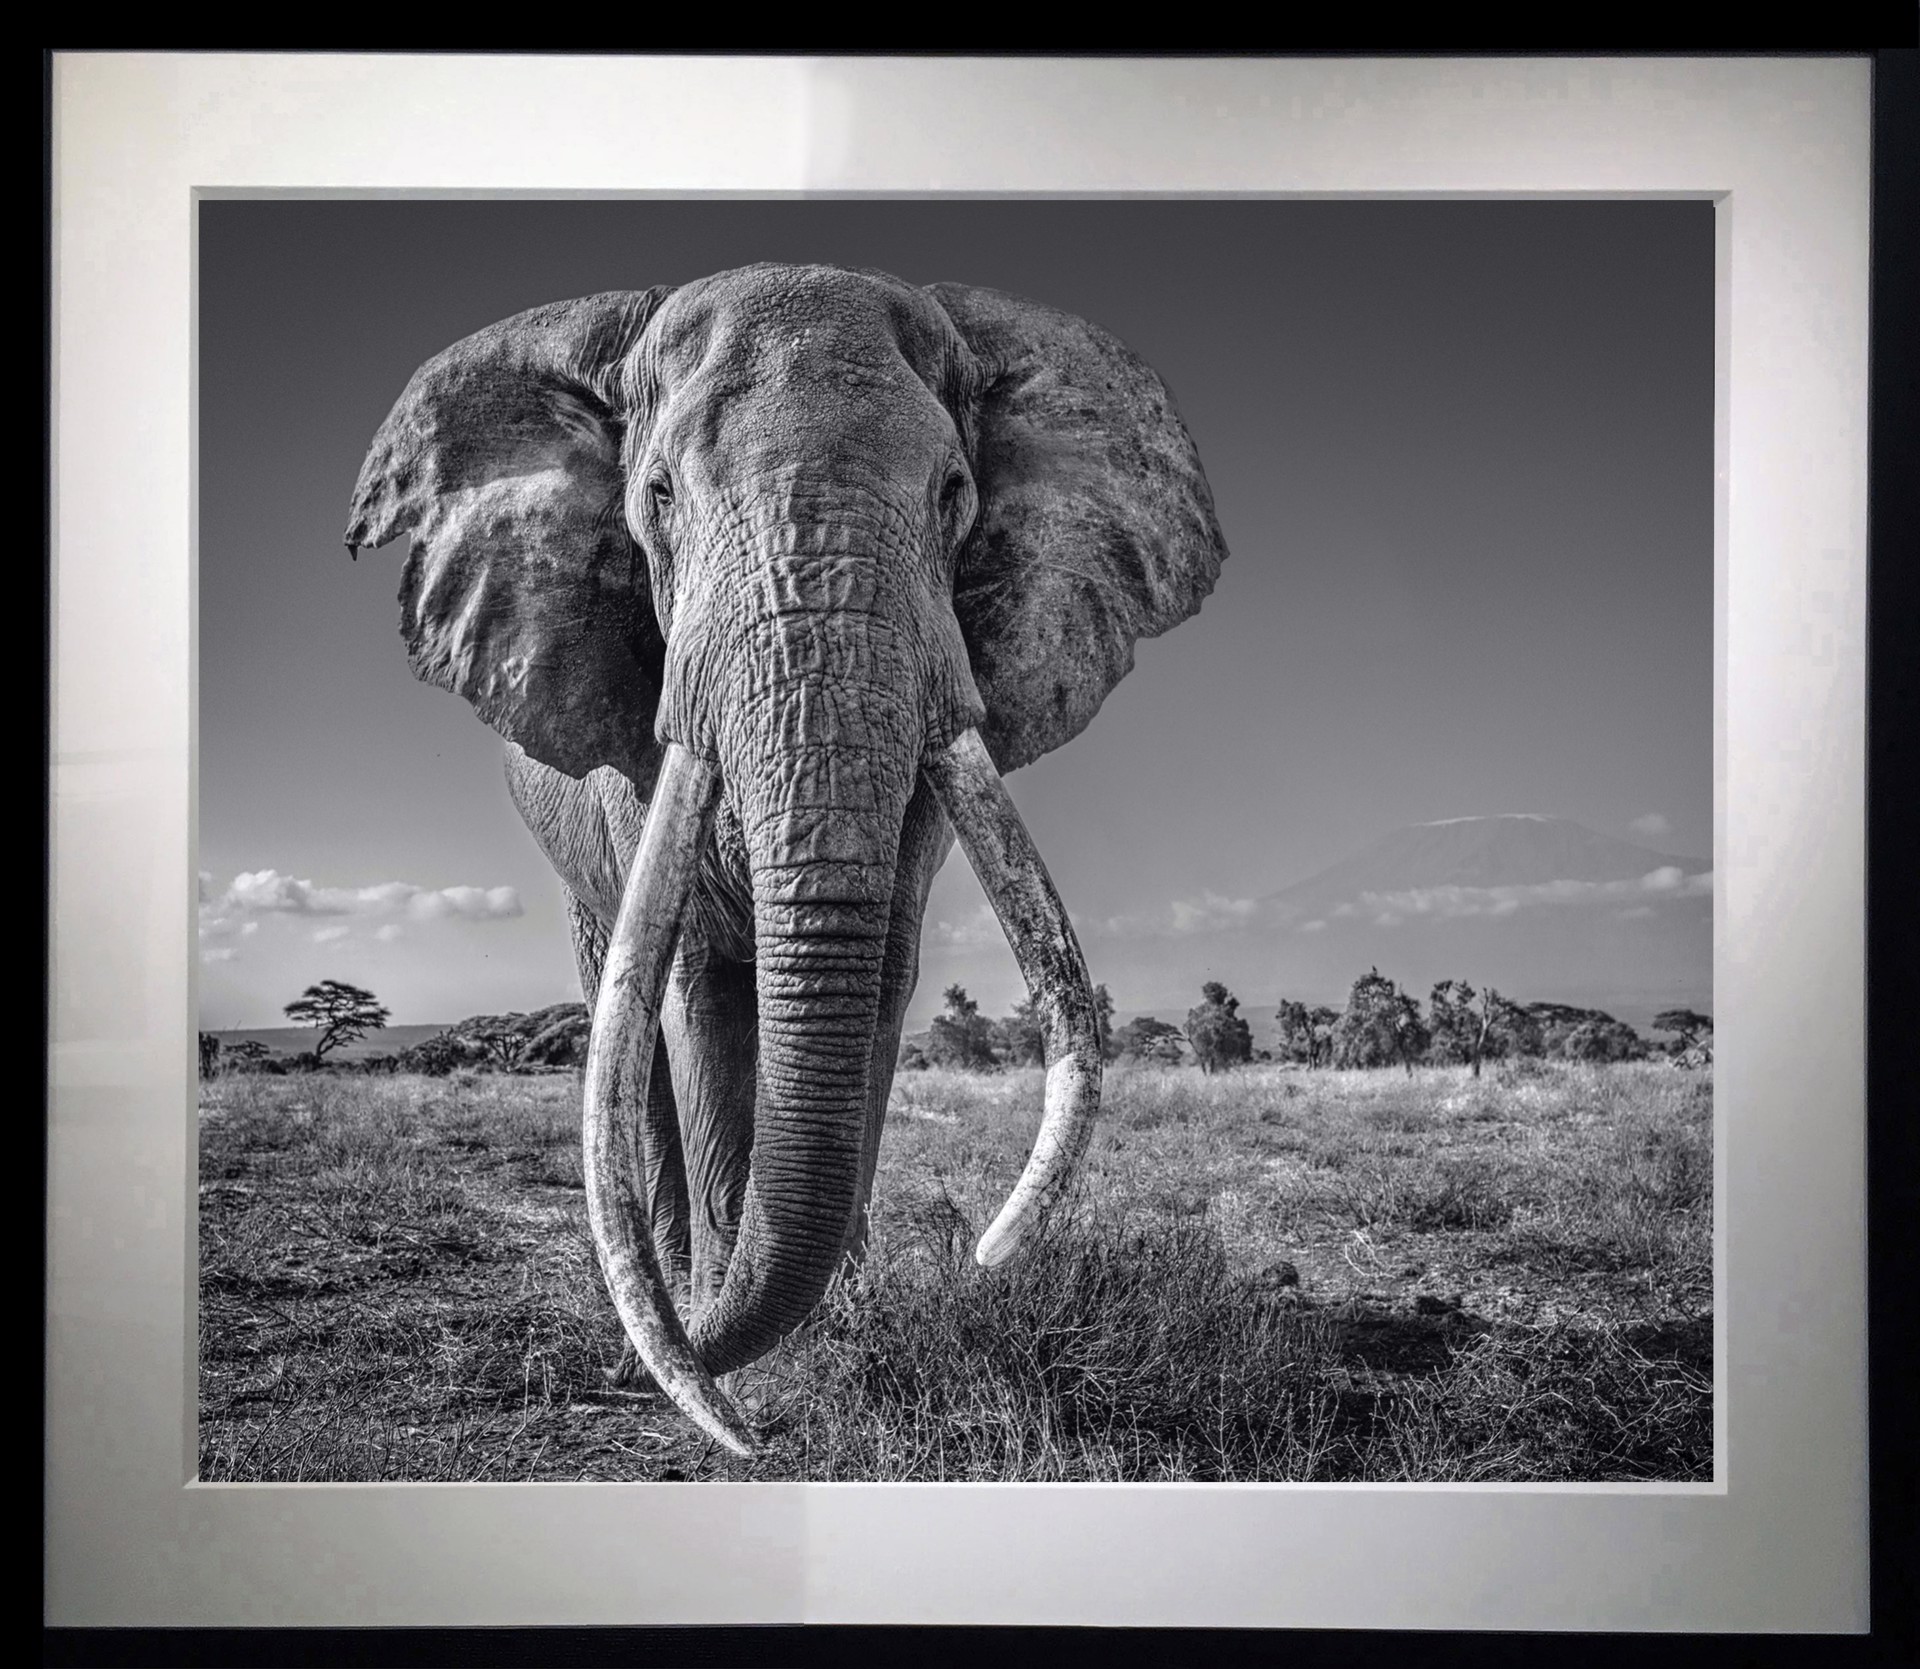 Space for Giants by David Yarrow